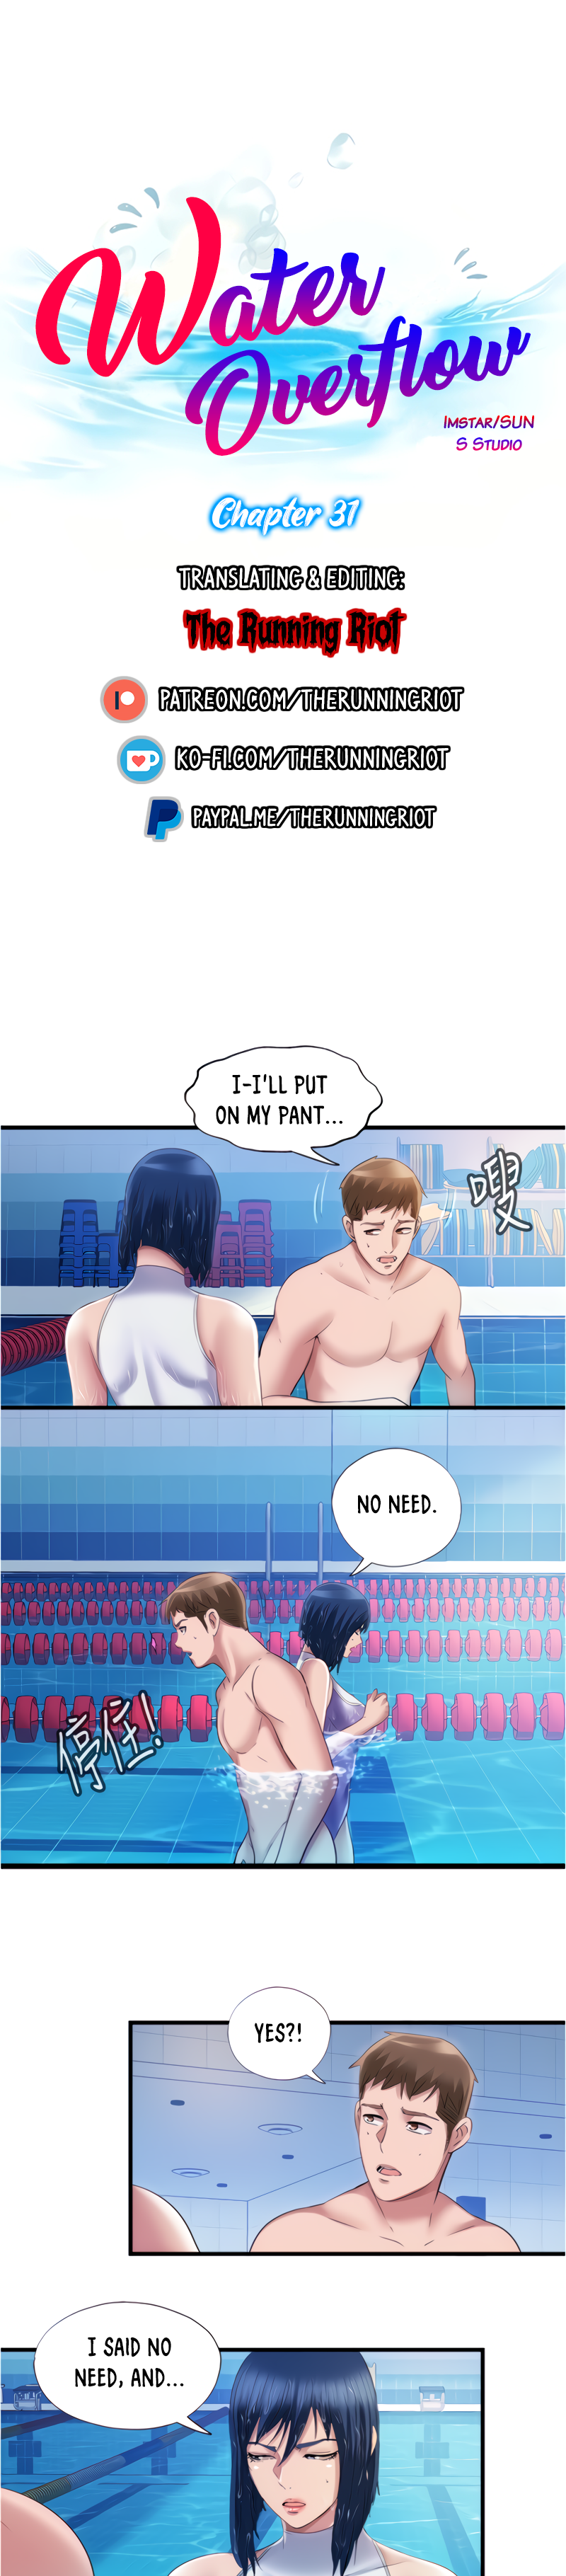 dripping-wet-chap-31-2